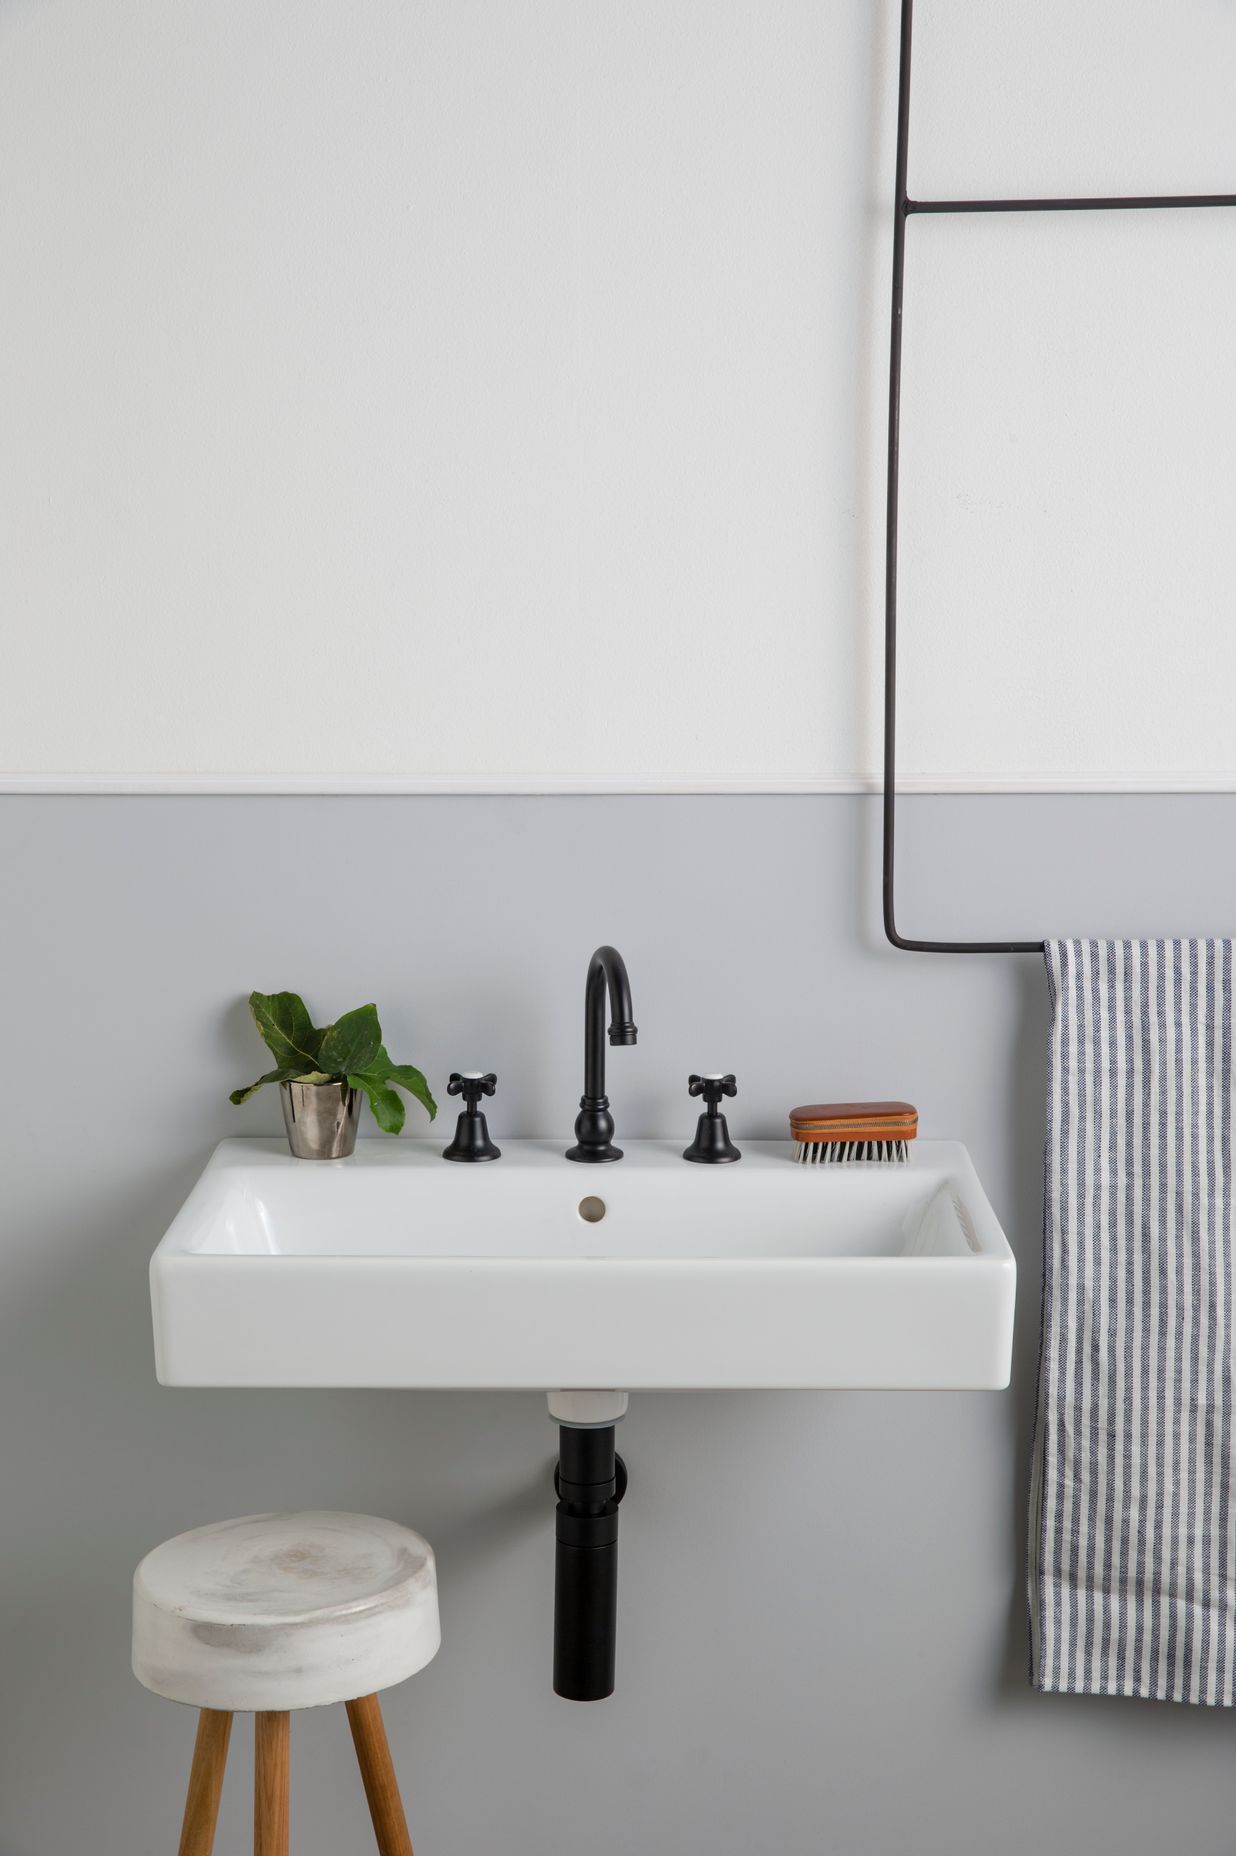 Q &amp; A WITH HOLLY (THE KITCHEN HUB) – CHOOSING THE RIGHT TAPWARE FOR YOUR BATHROOM DESIGN